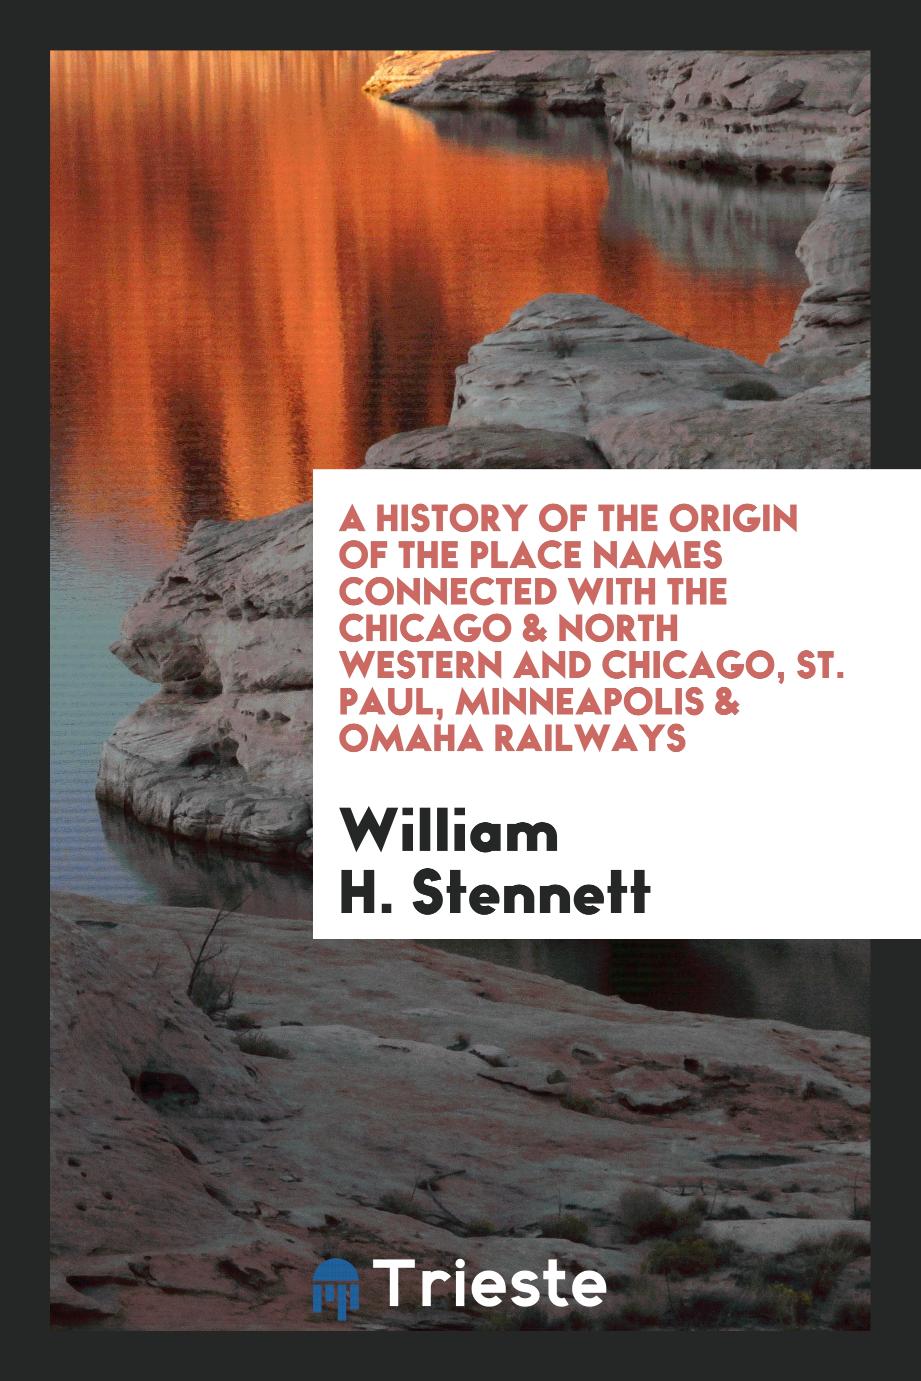 A History of the Origin of the Place Names Connected with the Chicago & North Western and Chicago, St. Paul, Minneapolis & Omaha Railways